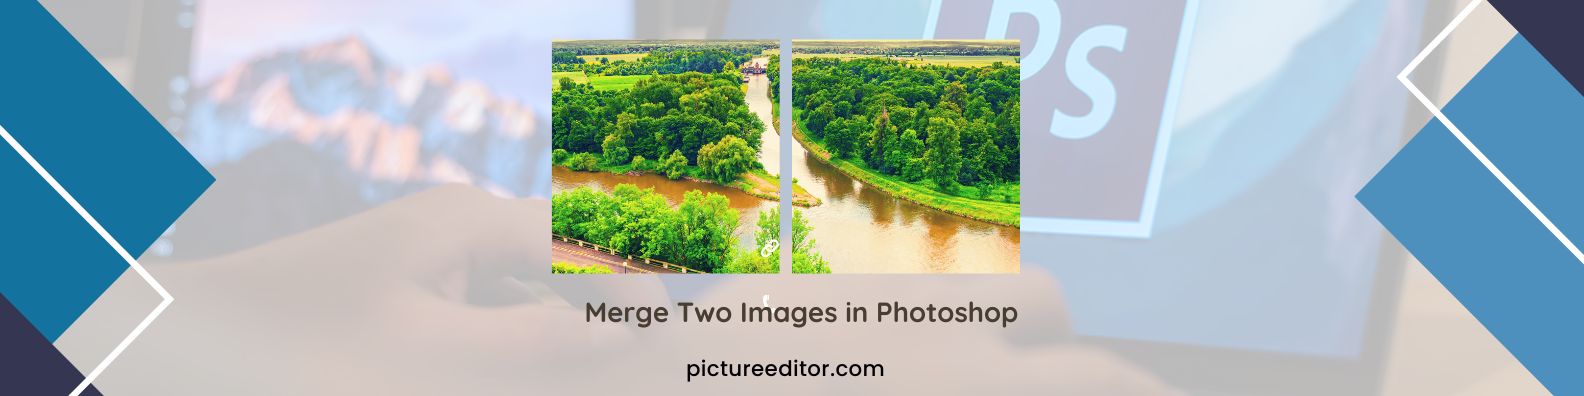 Merge Two Images in Photoshop